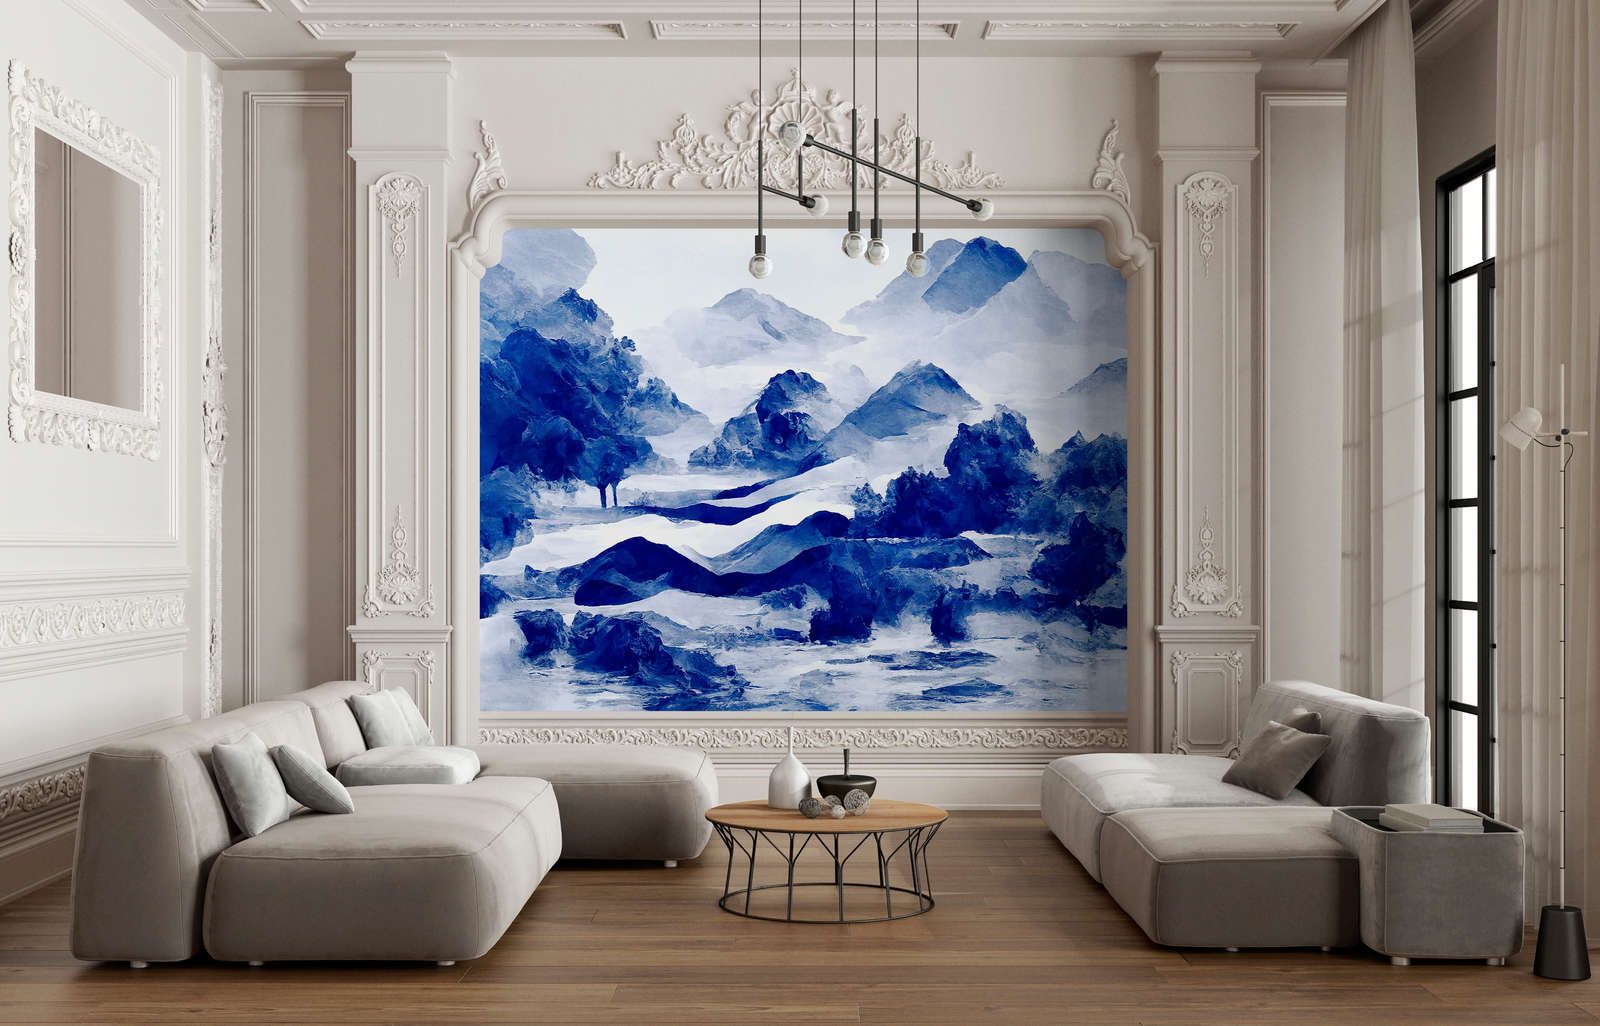             Photo wallpaper »tinterra 3« - Landscape with mountains & fog - Blue | Smooth, slightly pearly shimmering non-woven fabric
        